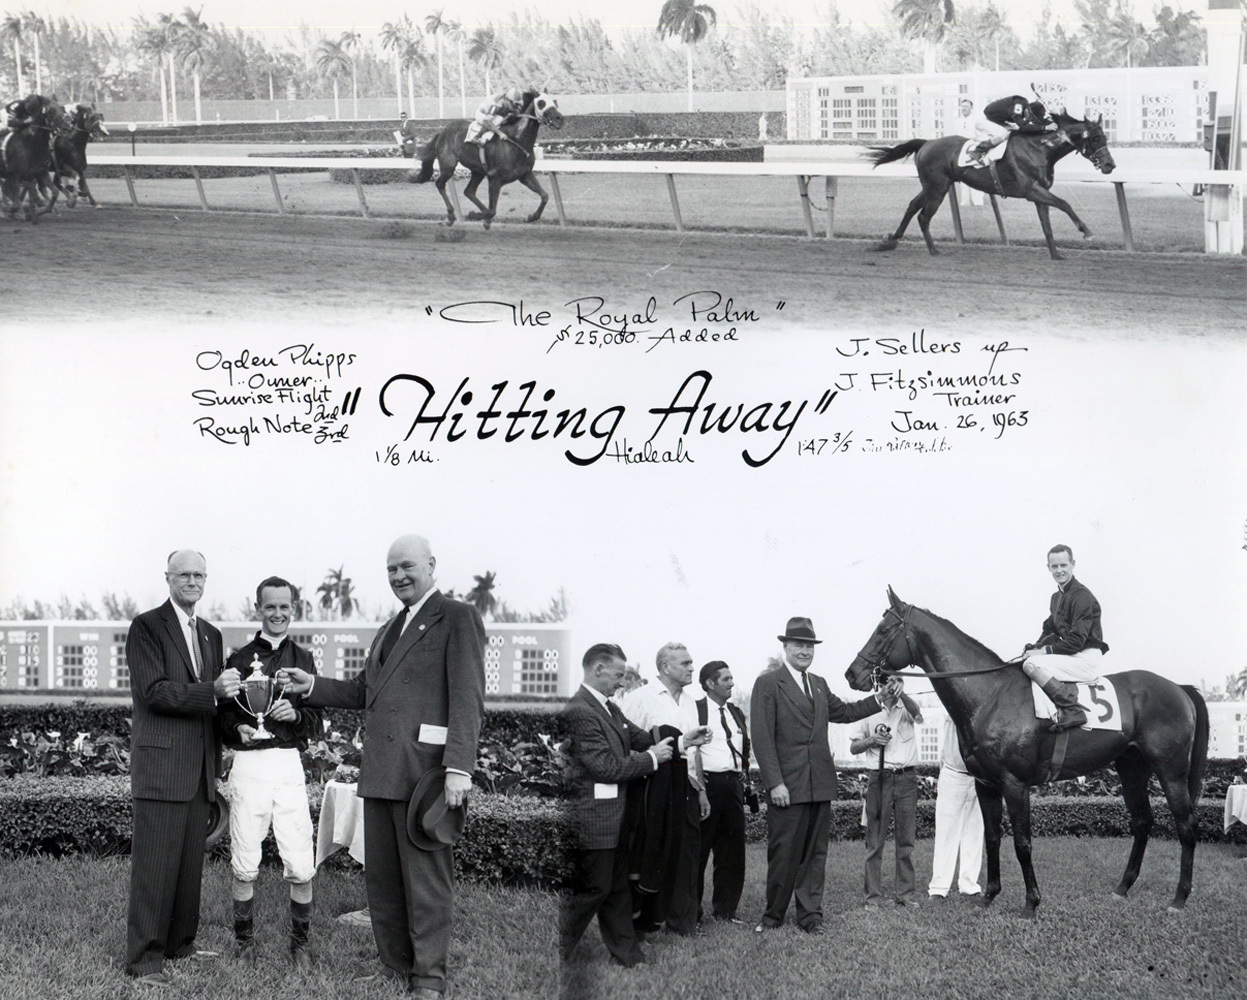 Win composite from the 1963 Royal Palm Handicap at Hialaeh, won by John Sellers and Hitting Away (Jim Raftery Turfotos/Museum Collection)